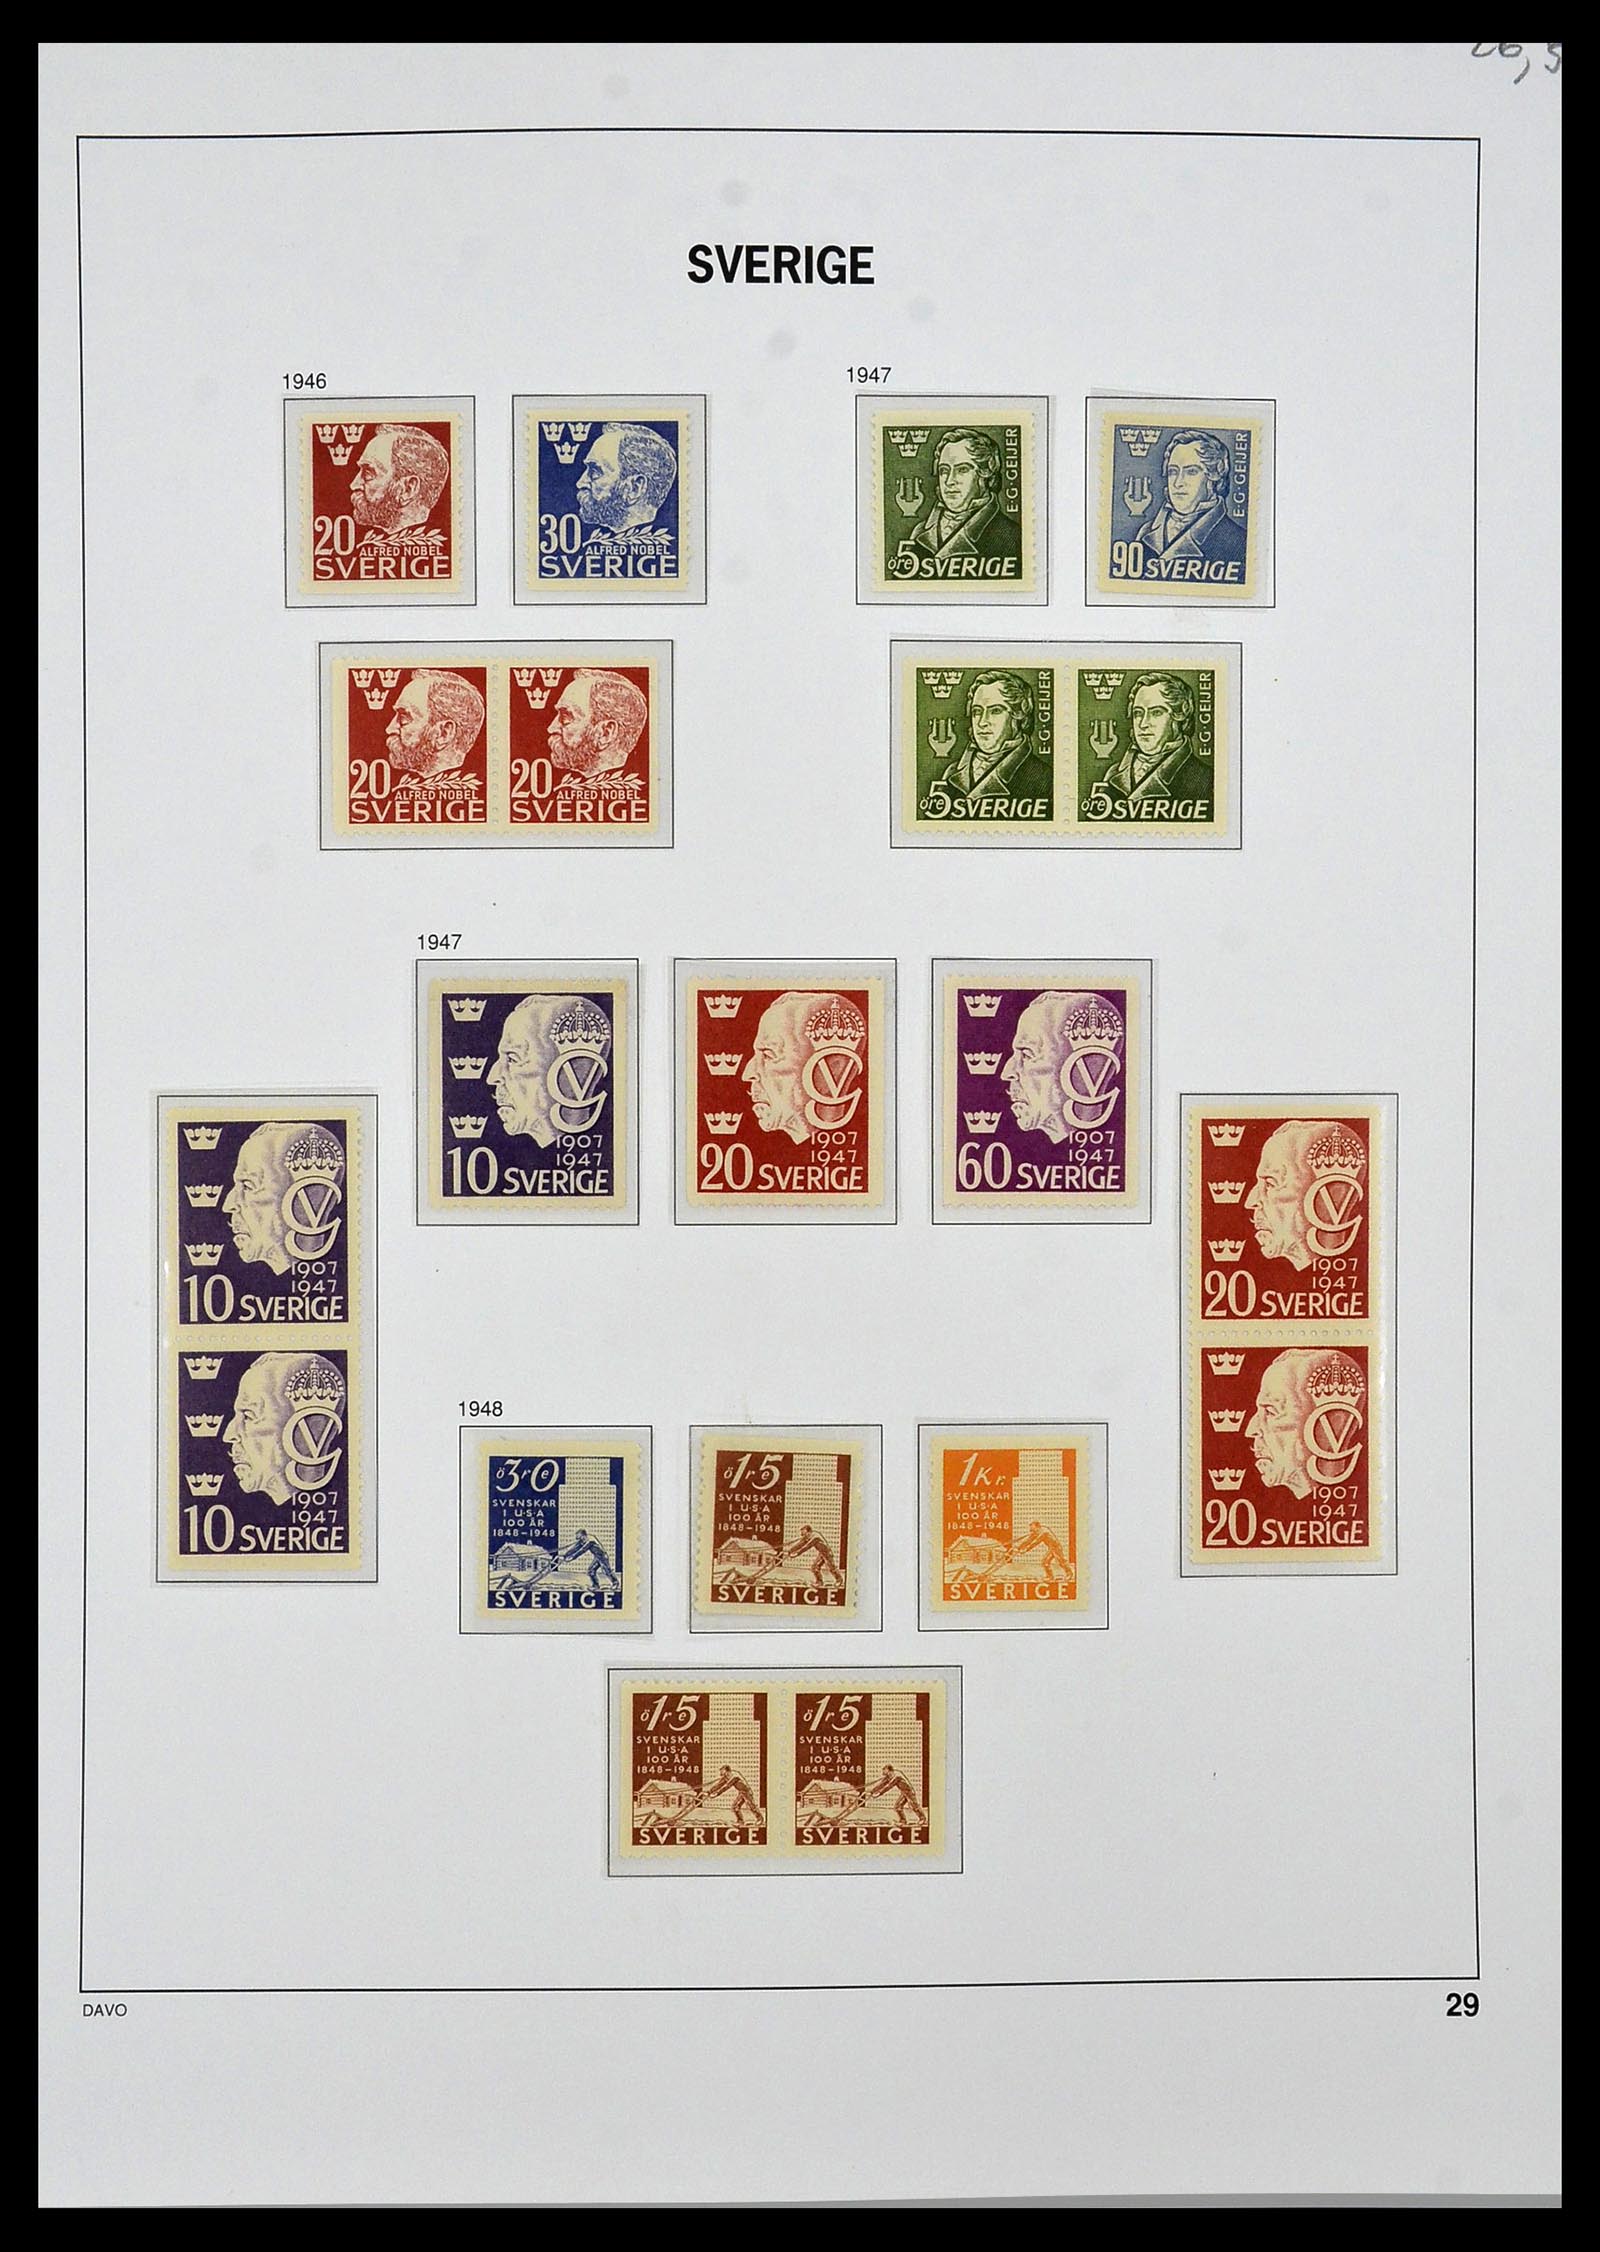 34292 026 - Stamp collection 34292 Sweden 1891-2015!